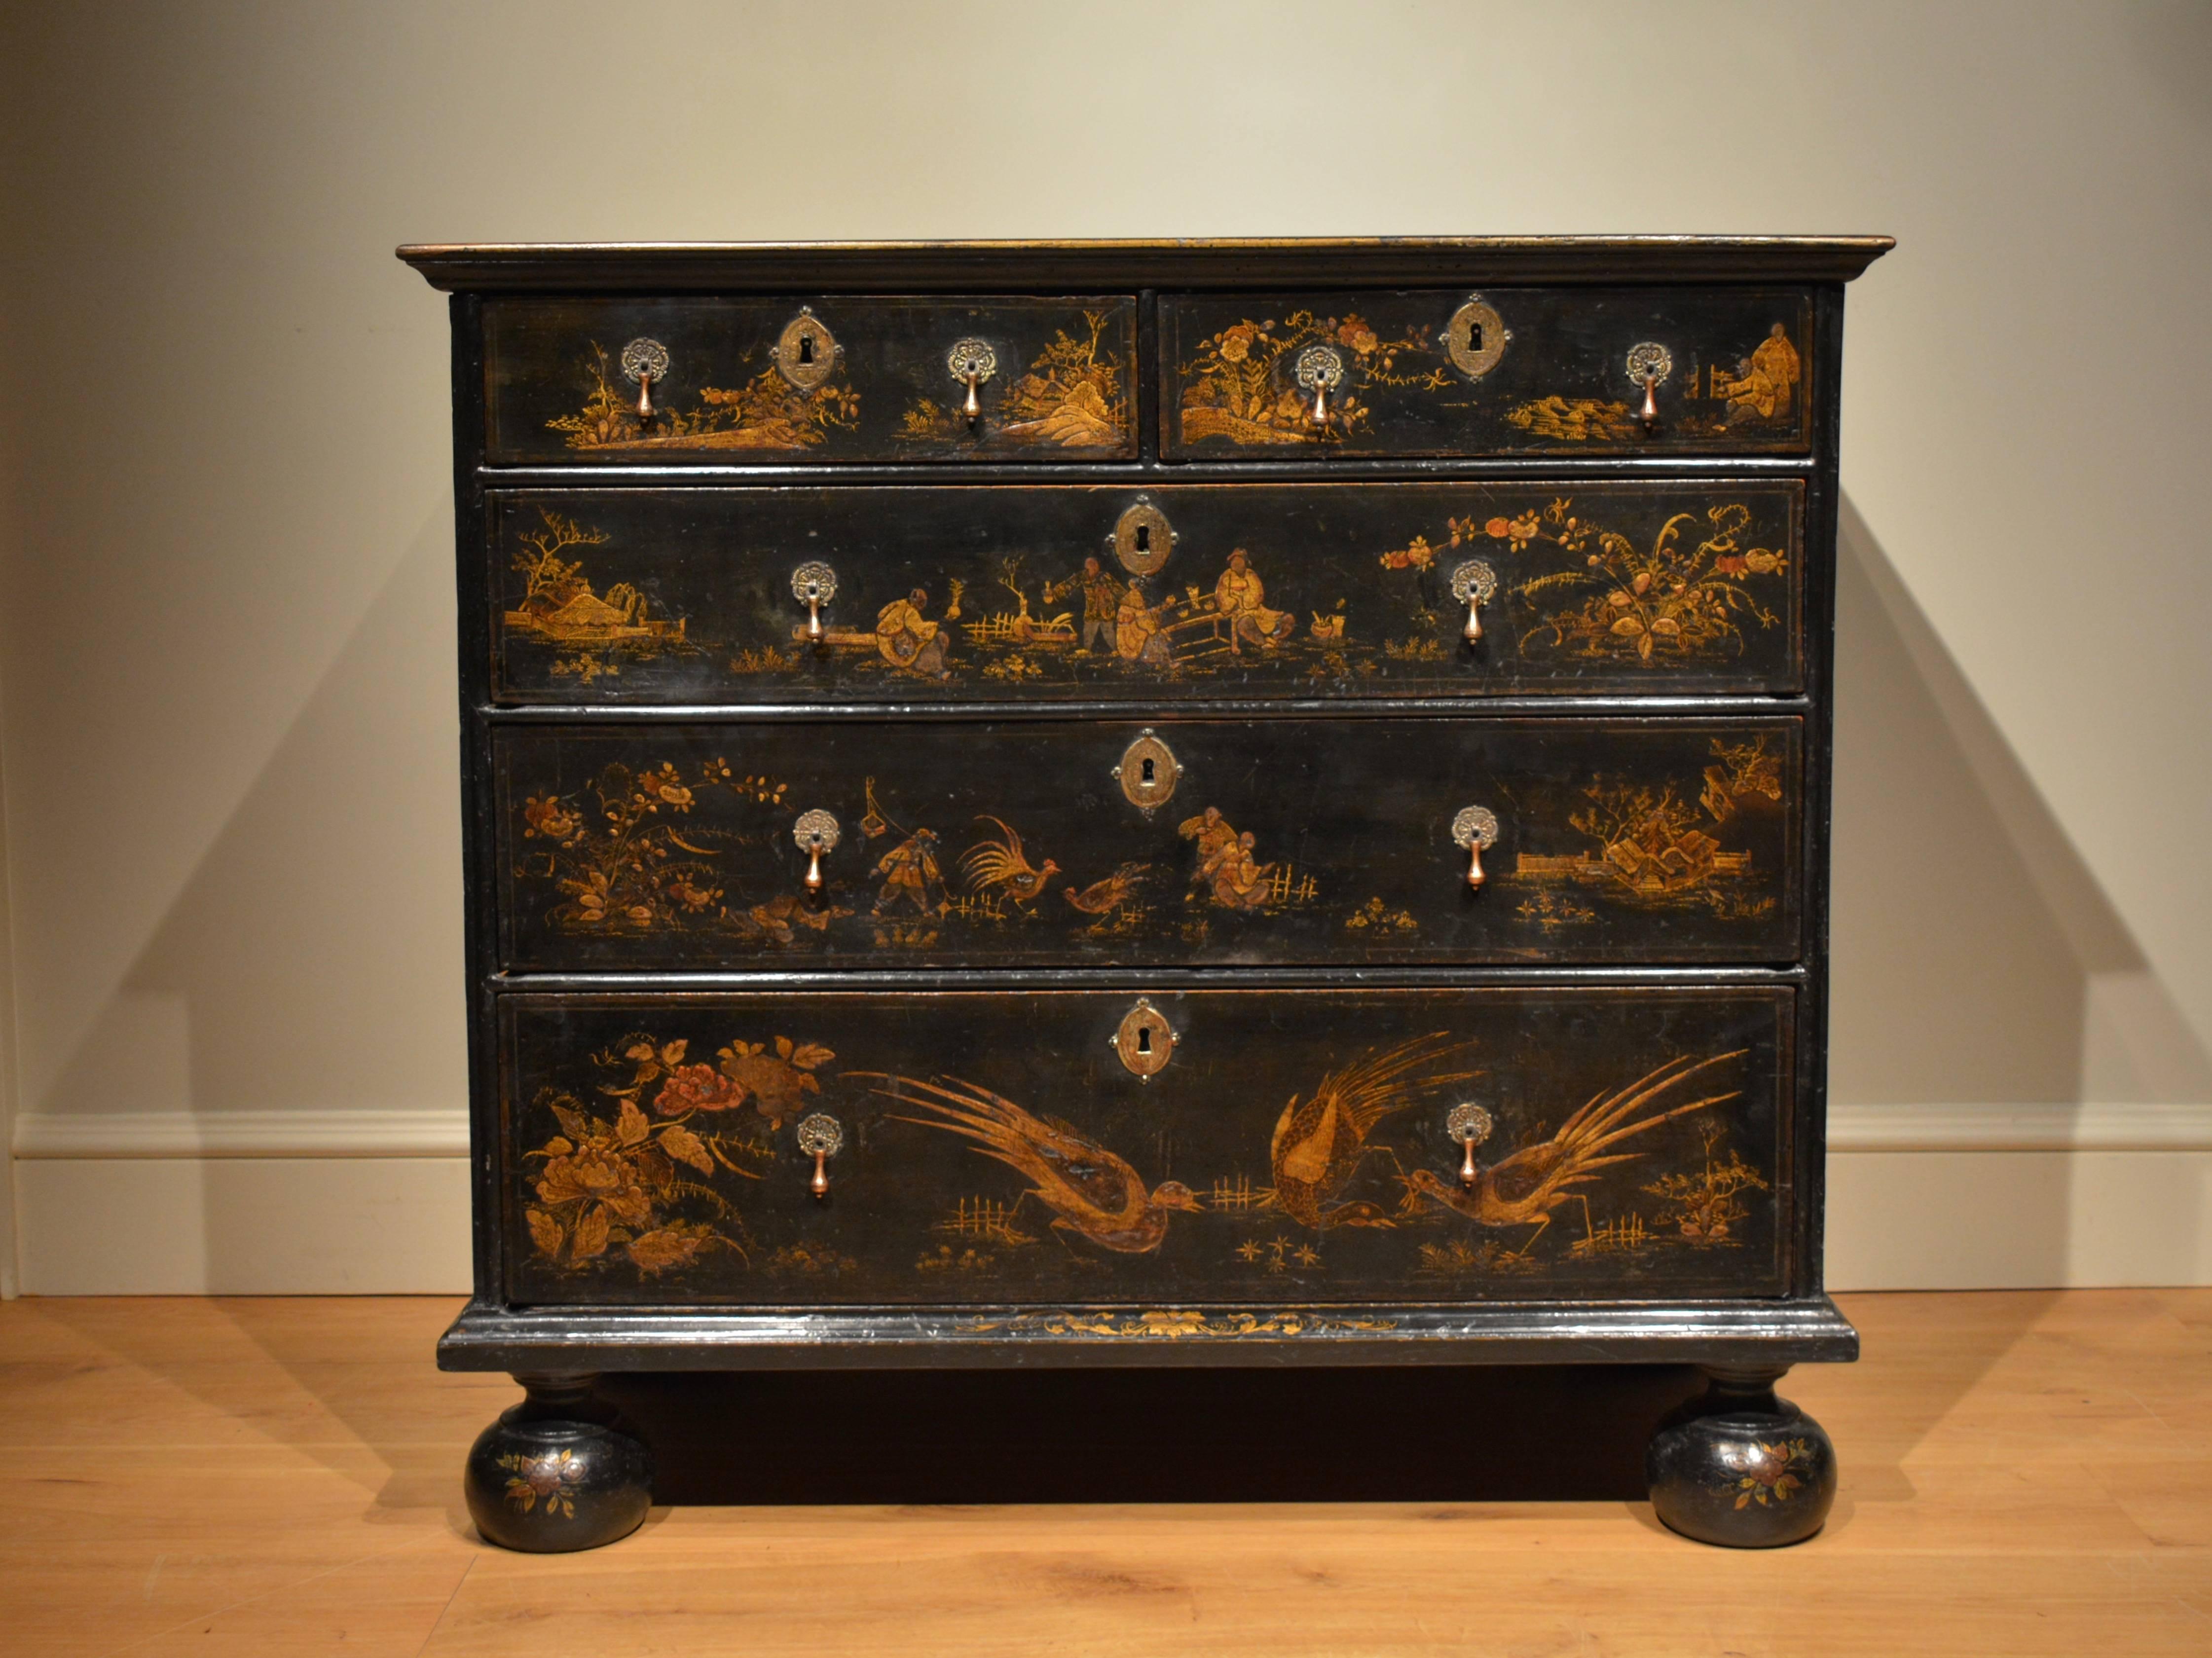 A fine quality japanned chest of drawers, decorated overall in gold and red against a black background depicting birds, people and foliage. This chest retains all it's original decoration, including that of the top, and also it's original brasses,